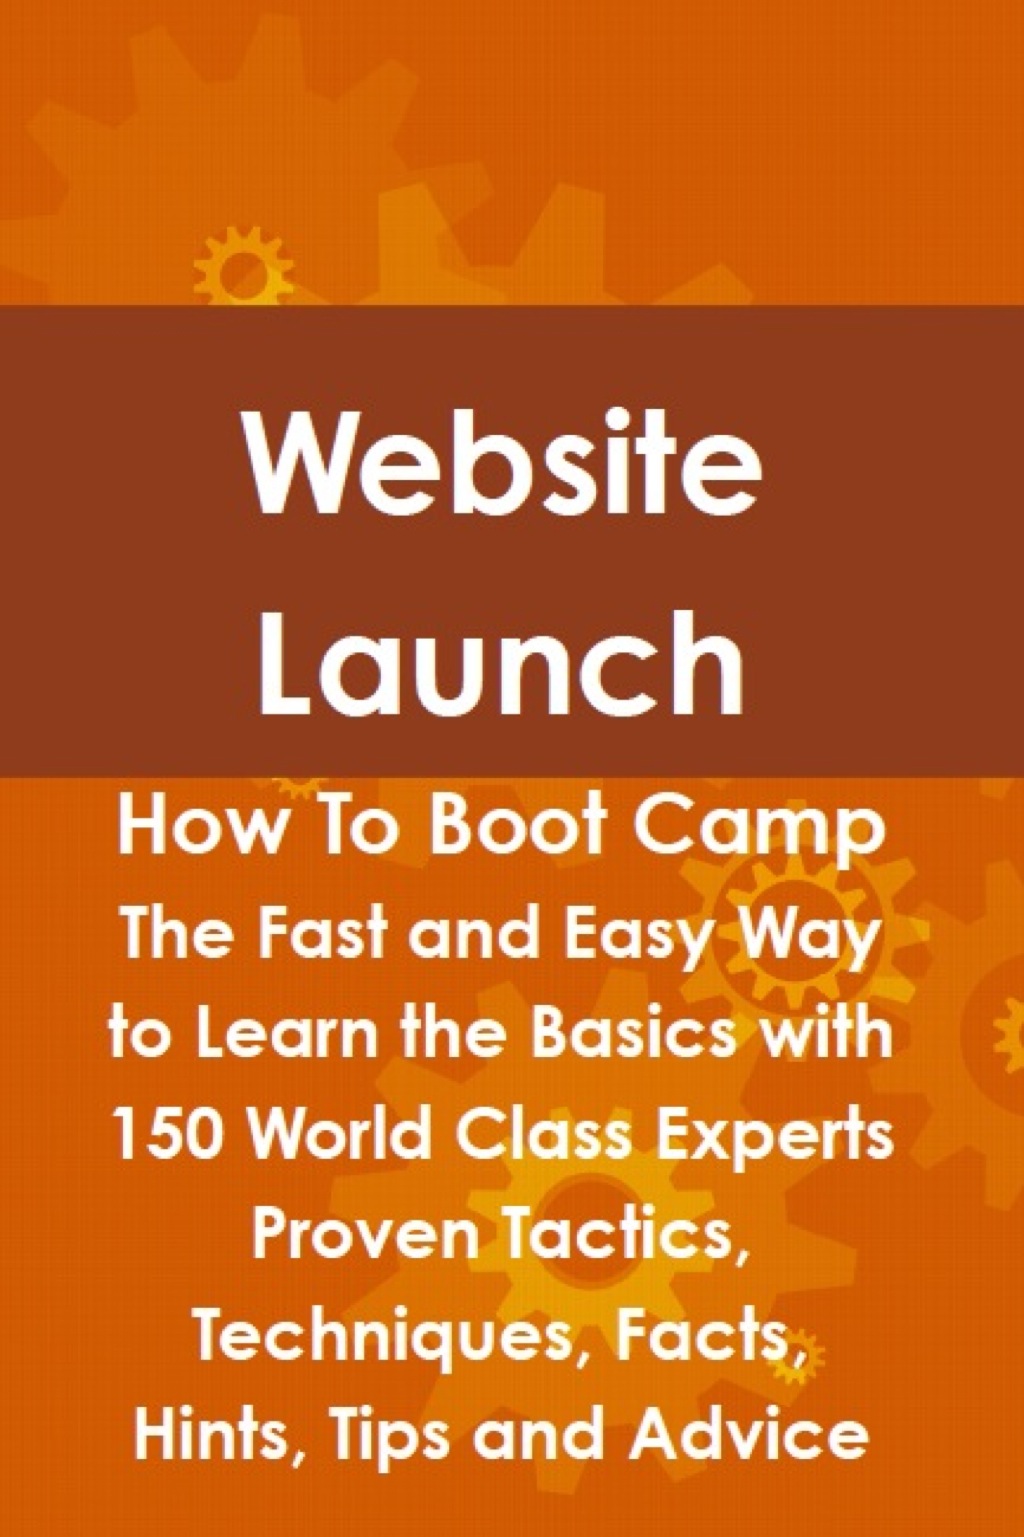 Website Launch How To Boot Camp: The Fast and Easy Way to Learn the Basics with 150 World Class Experts Proven Tactics  T (eBook) - Steve Fox,